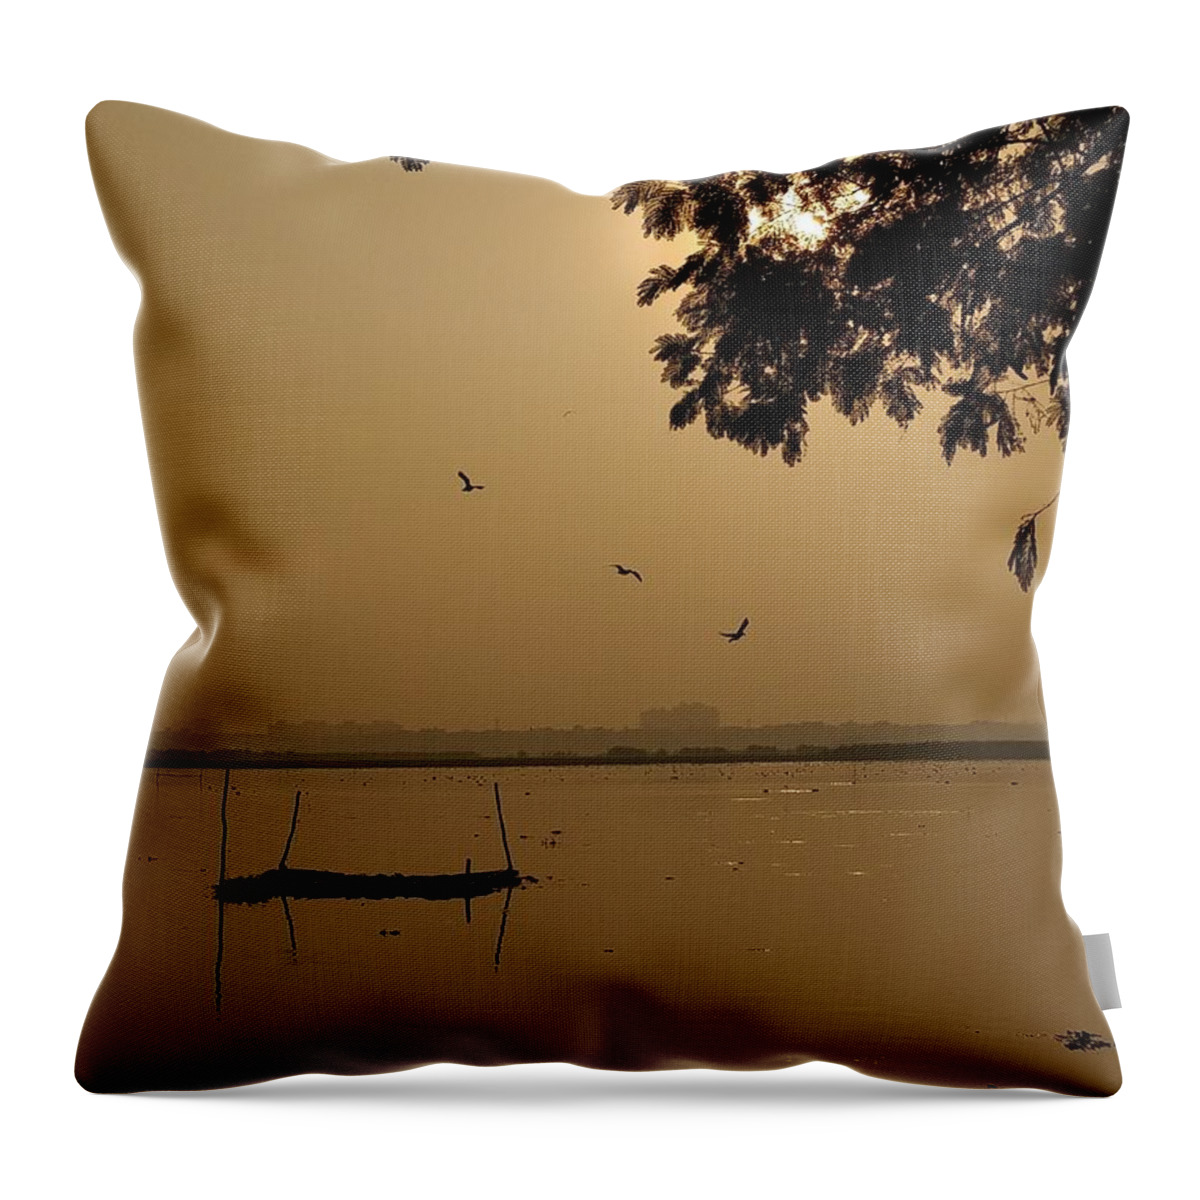 Sunset Throw Pillow featuring the photograph Sunset by Priya Hazra